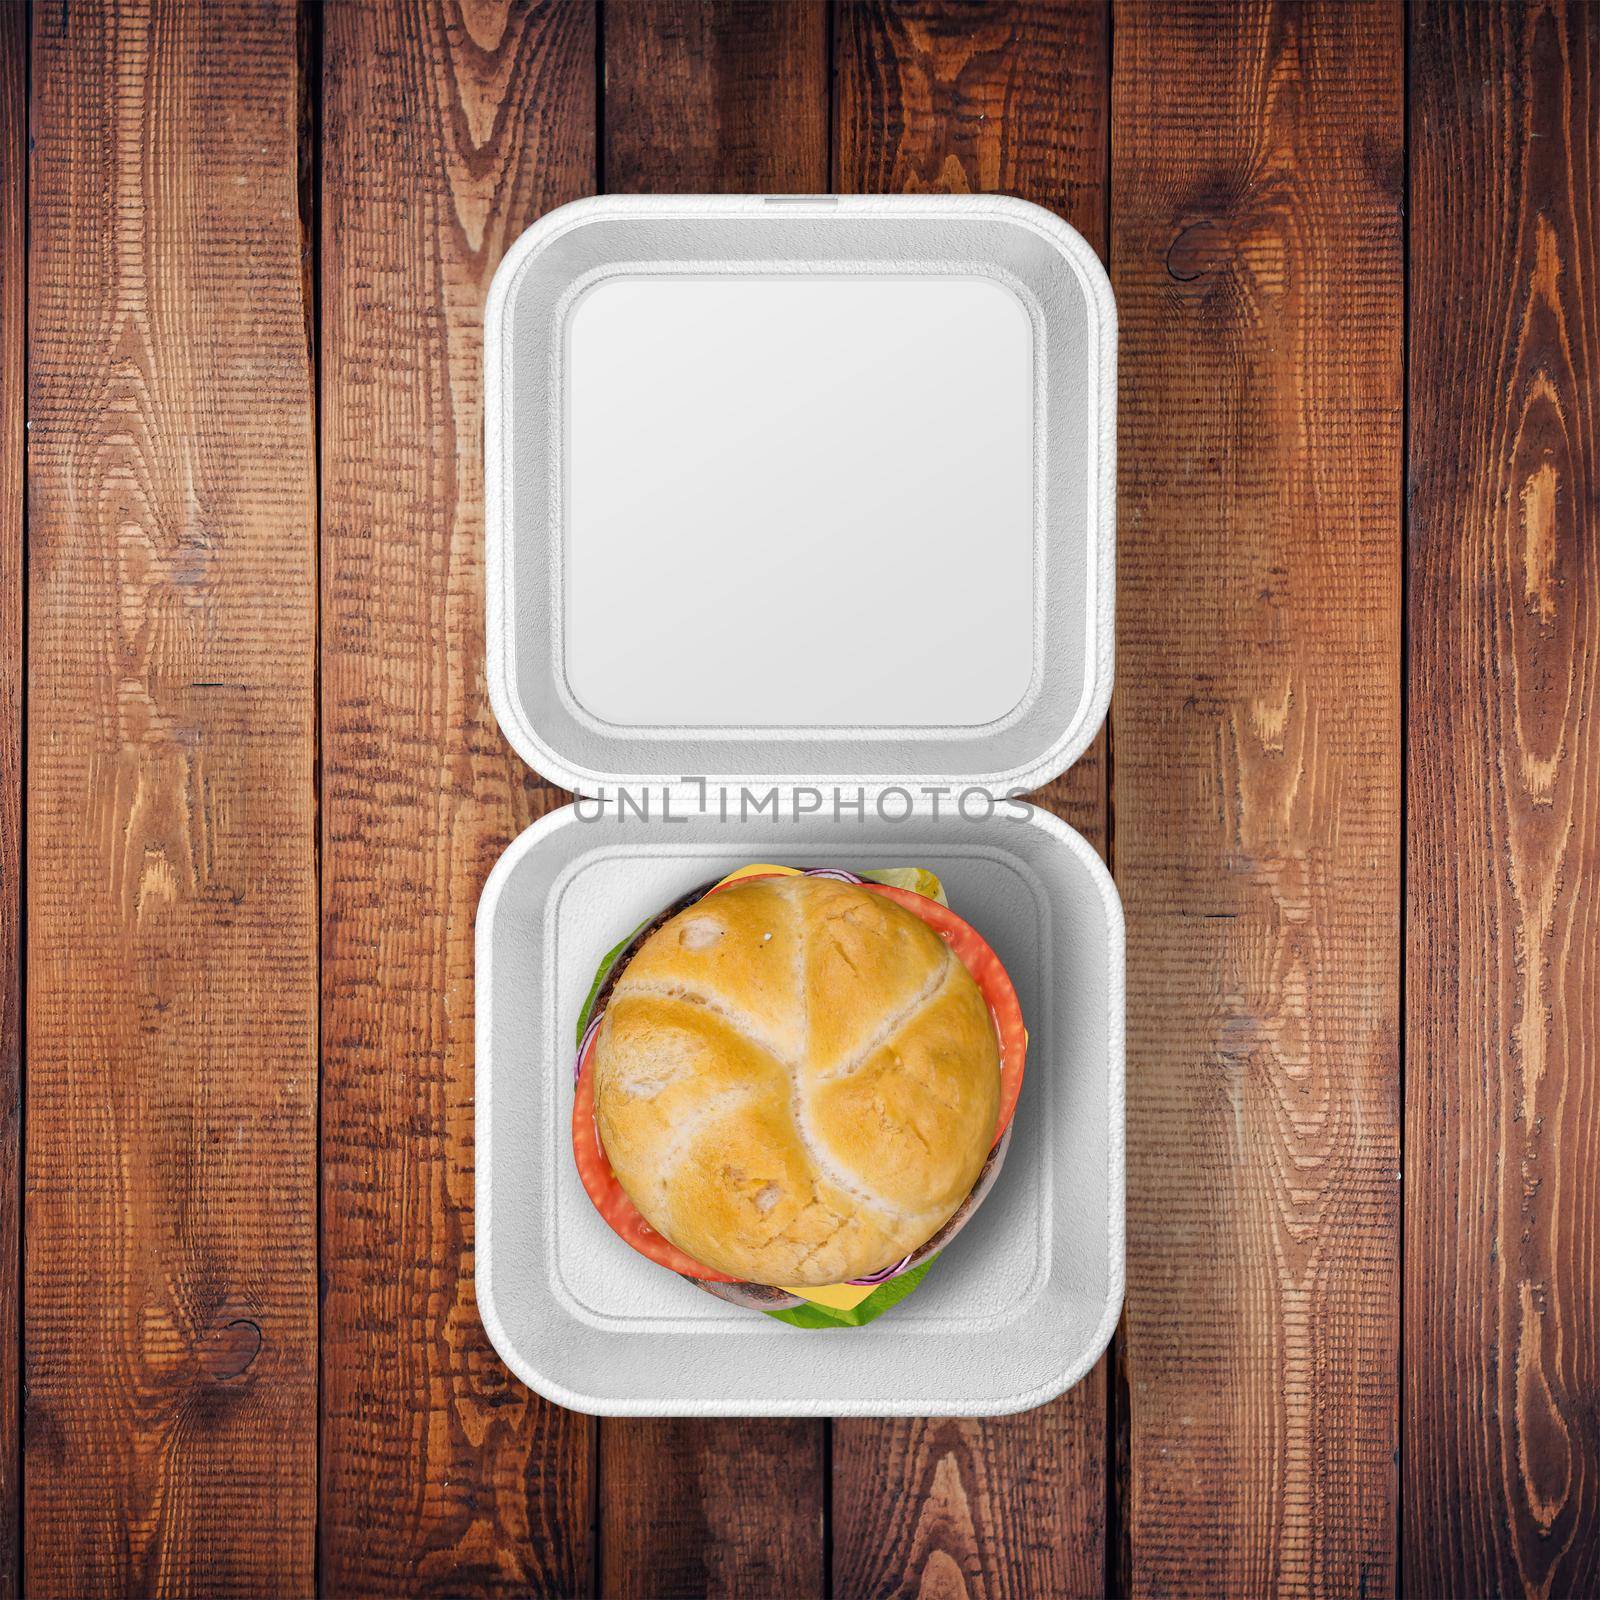 White Food Container Sticker With Burger Mockup On The Wood Table